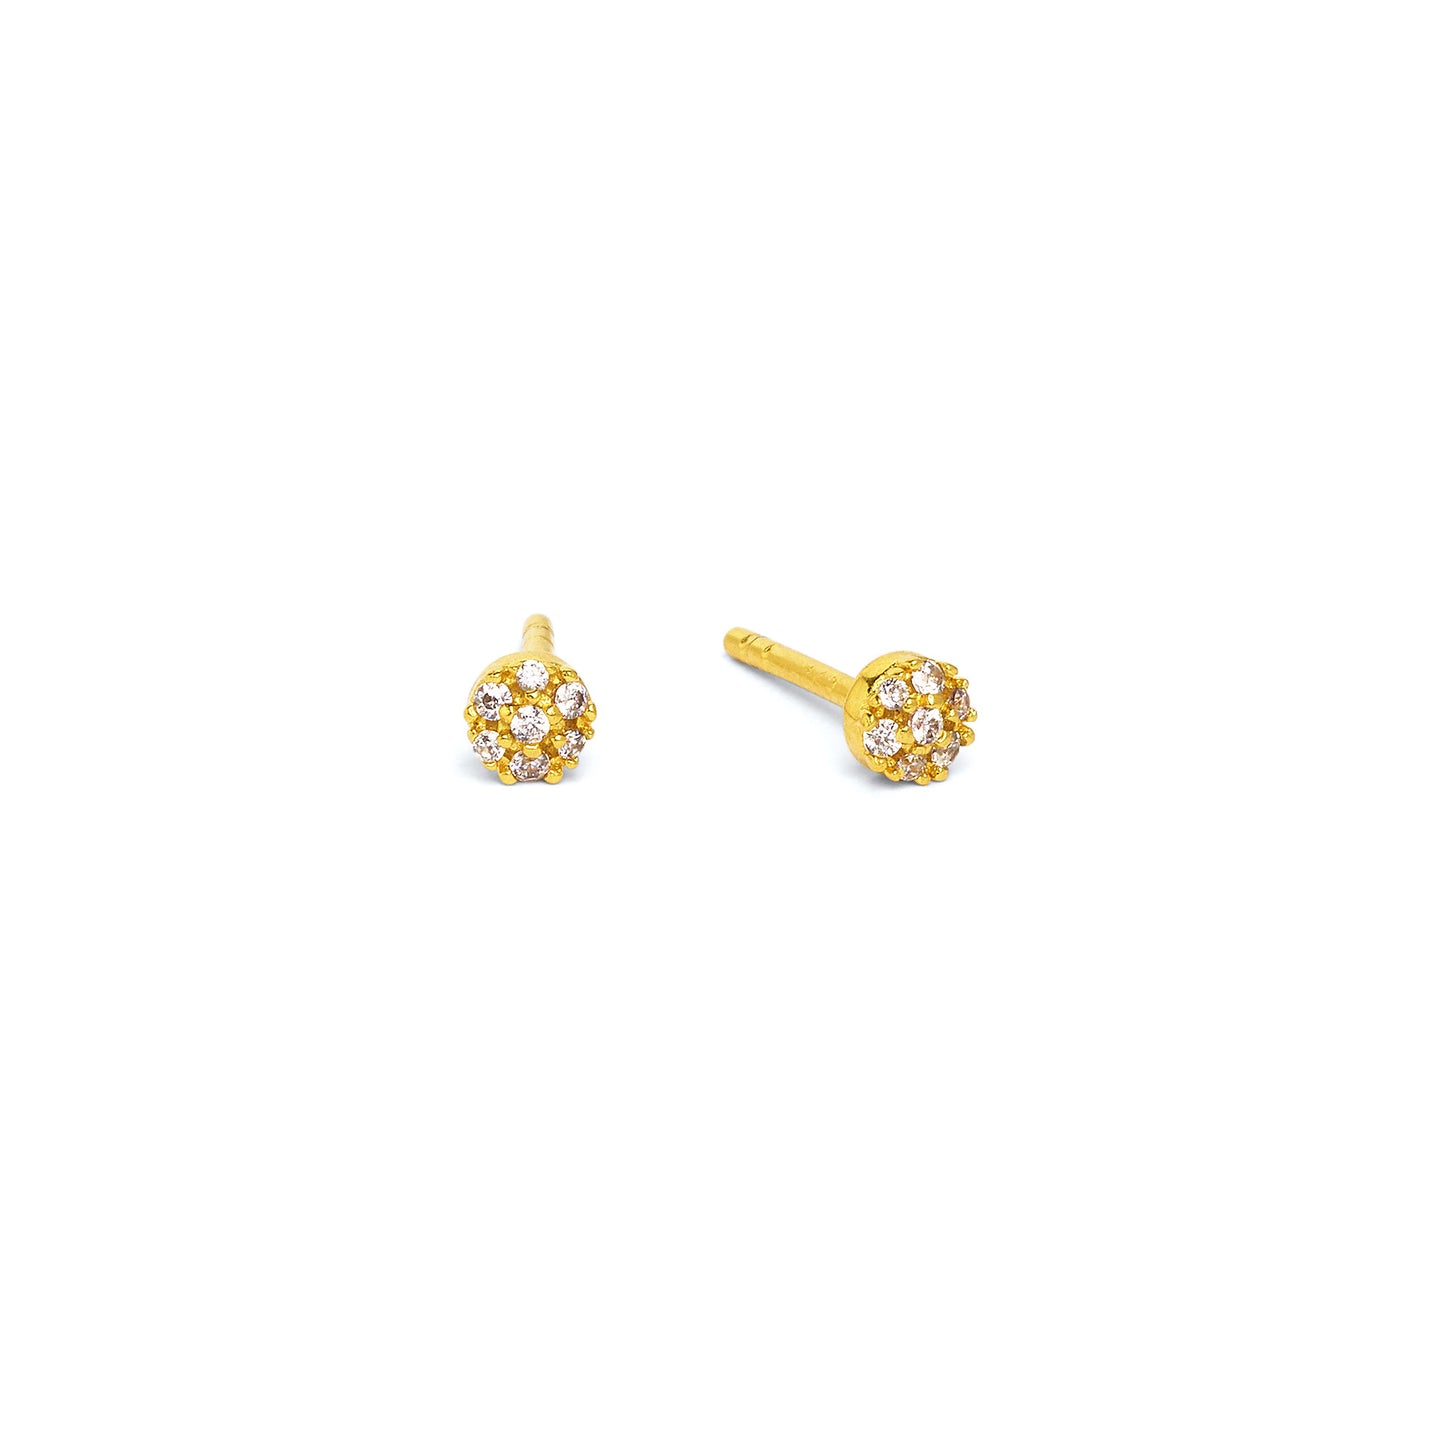 Bernd Wolf Collection "Francis" Stud Earrings